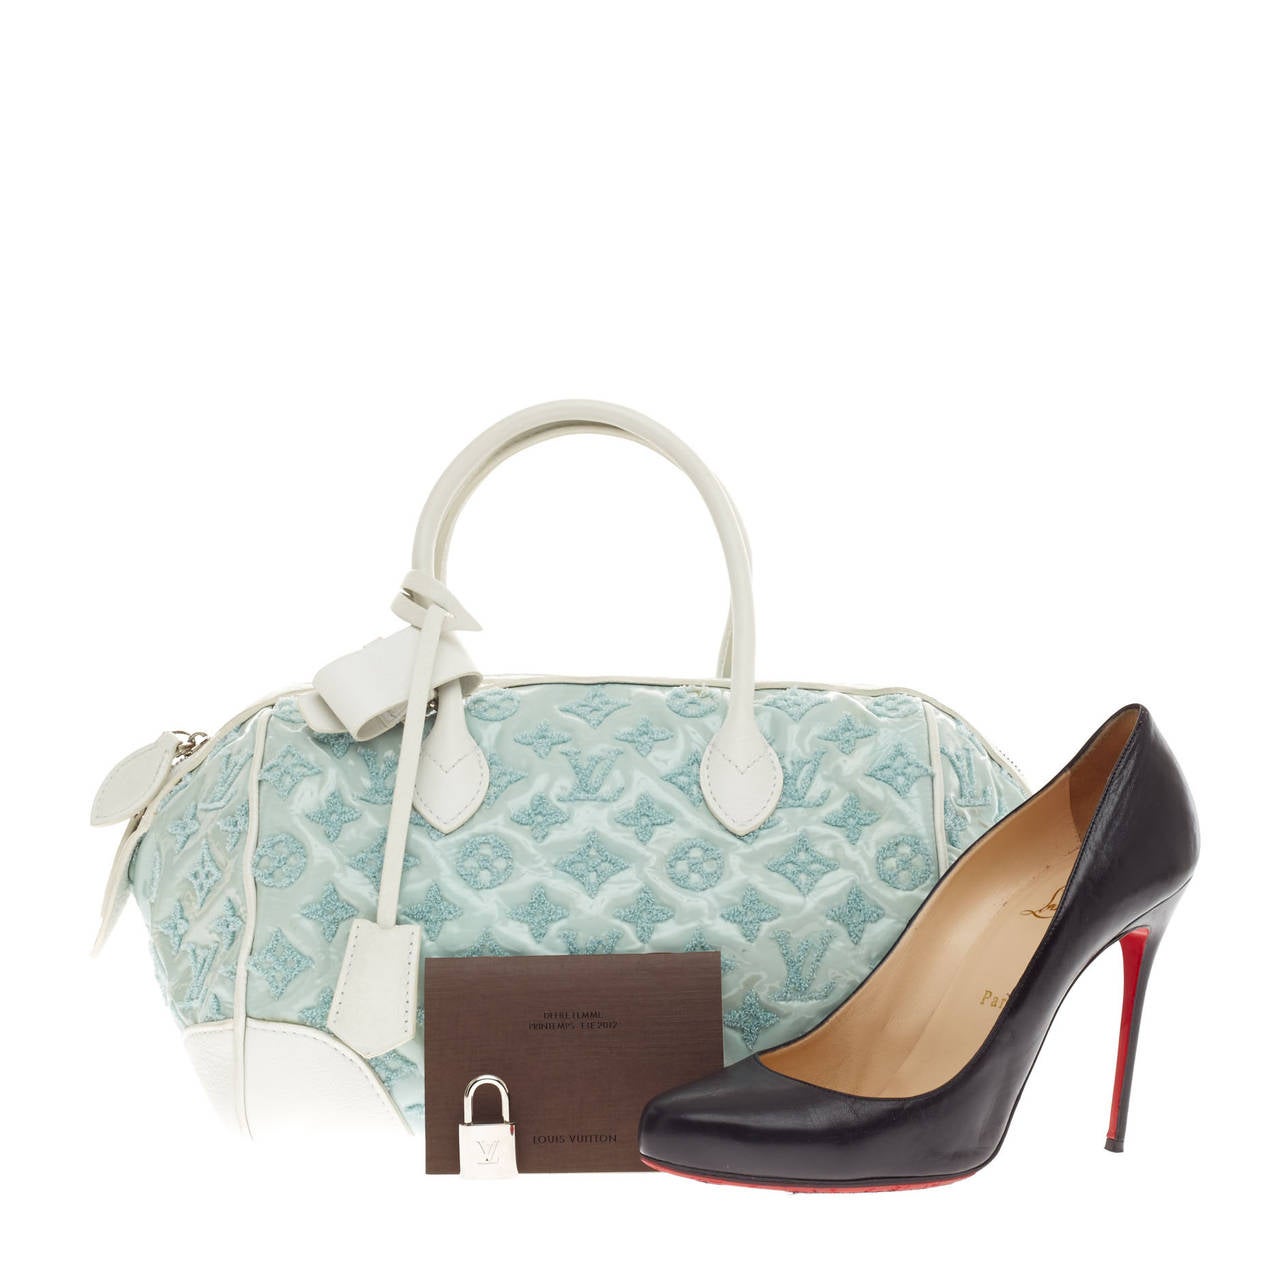 This authentic Louis Vuitton Round Speedy Monogram Bouclettes in Mint is great for everyday wear and perfect for spring season. This Spring/Summer 2012 Limited Edition design features an embroidered monogram pattern on a pastel blue patent leather